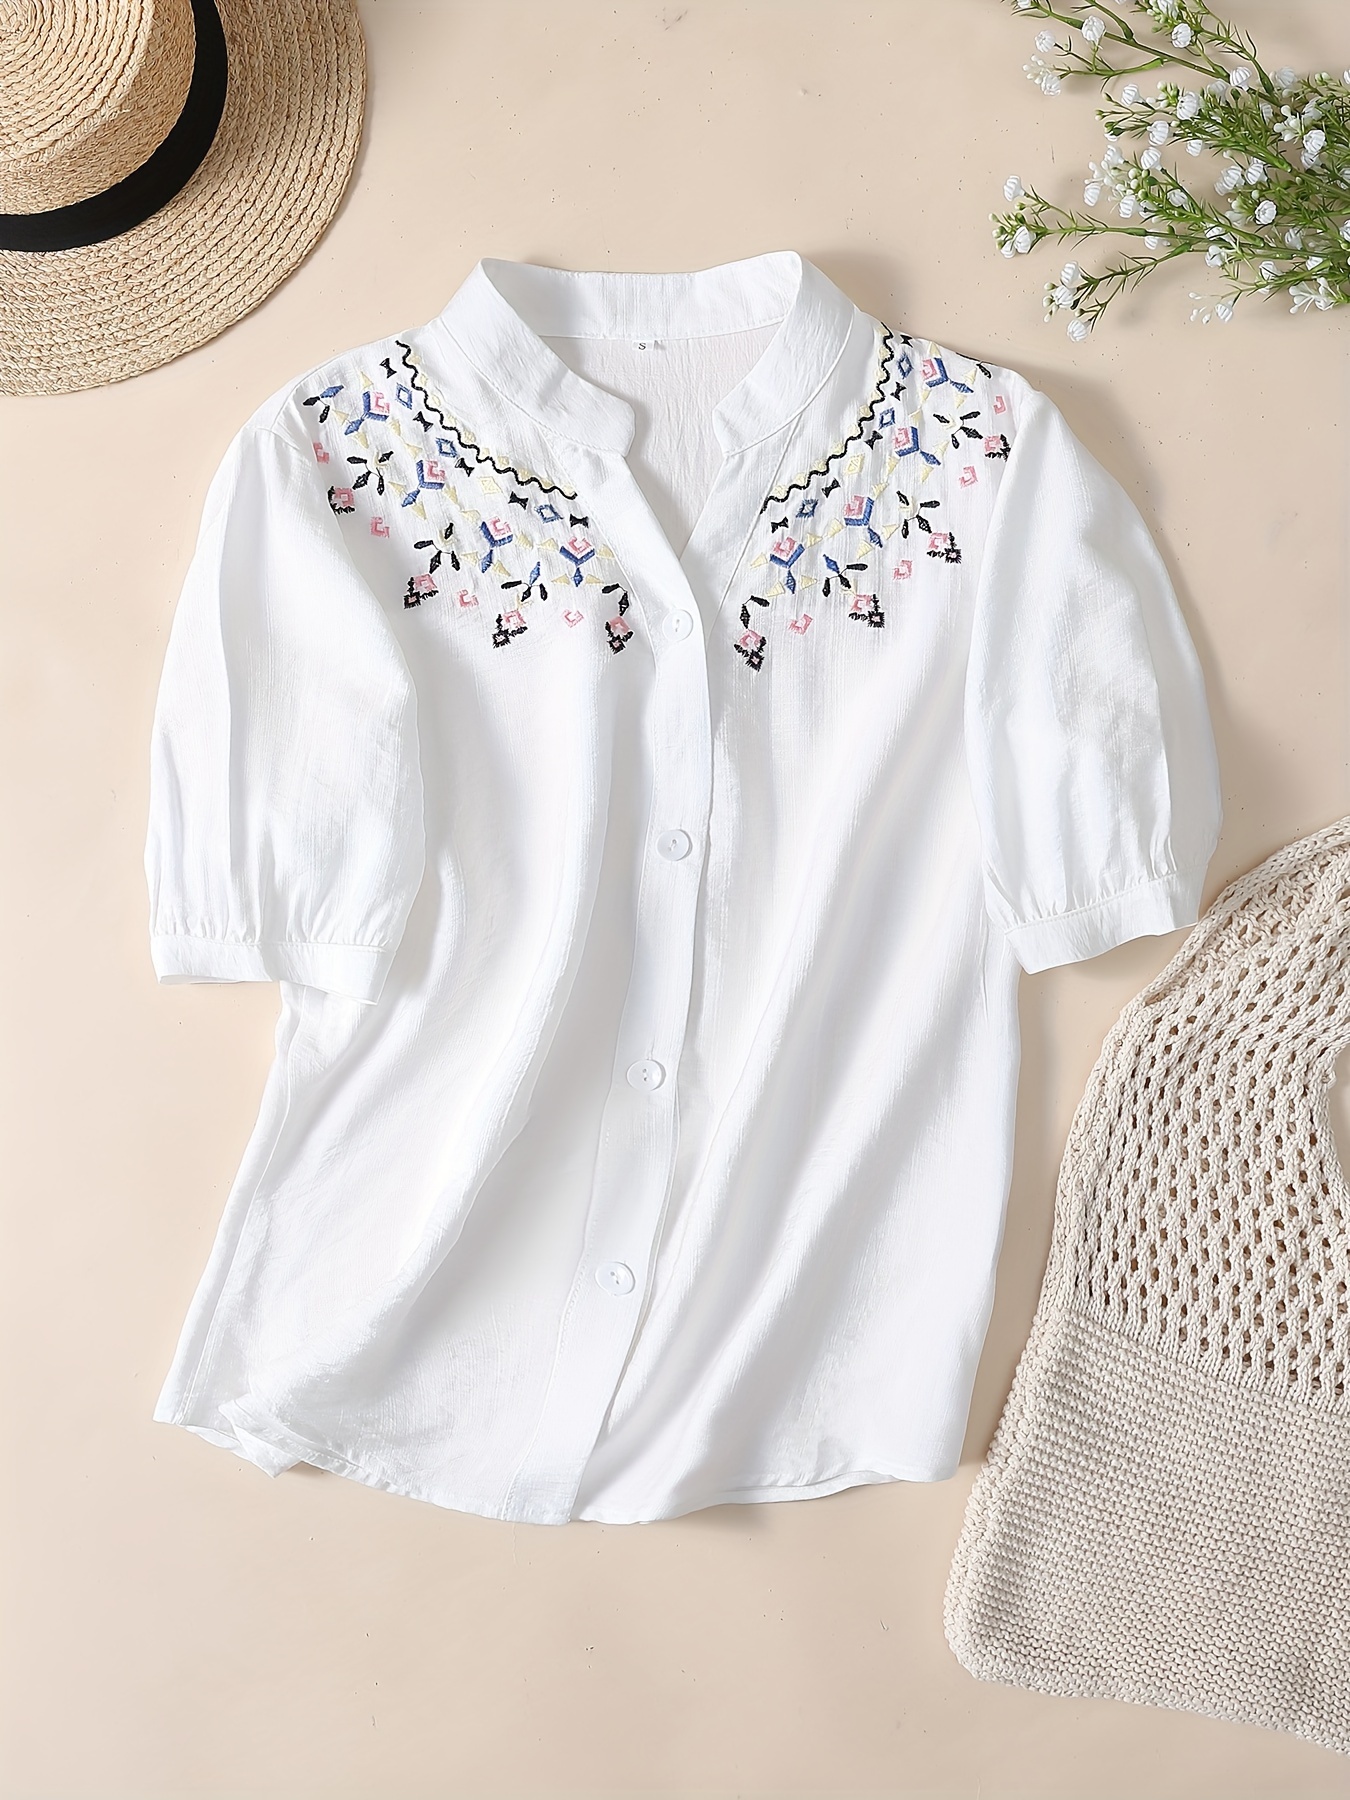 Embroidered Tops Woman, Explore our New Arrivals